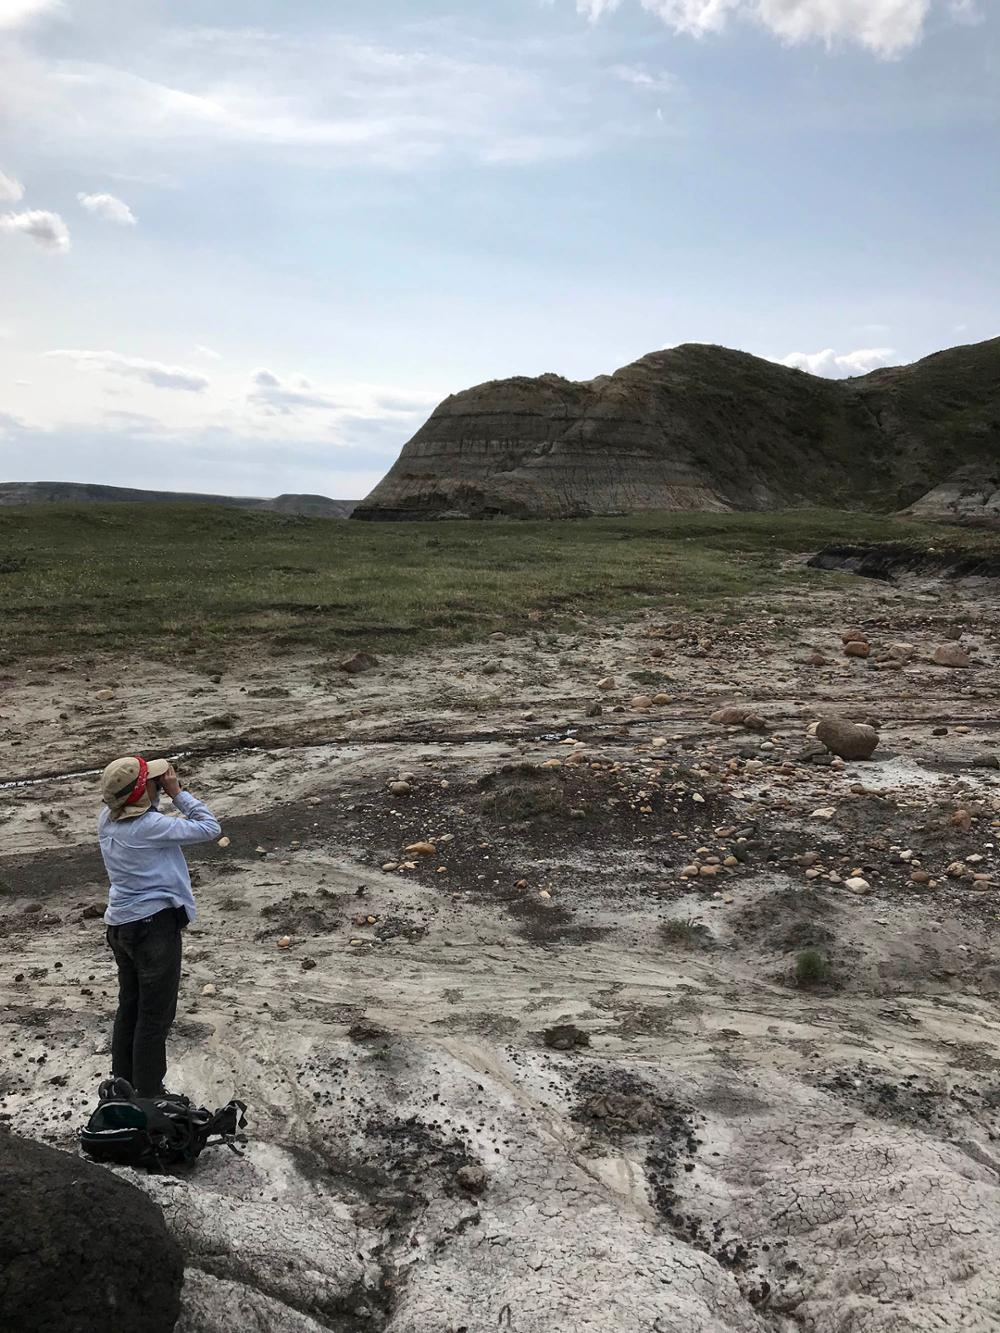 Professor stands on an outcrop looking through binoculars at the Big Muddy Badlands.